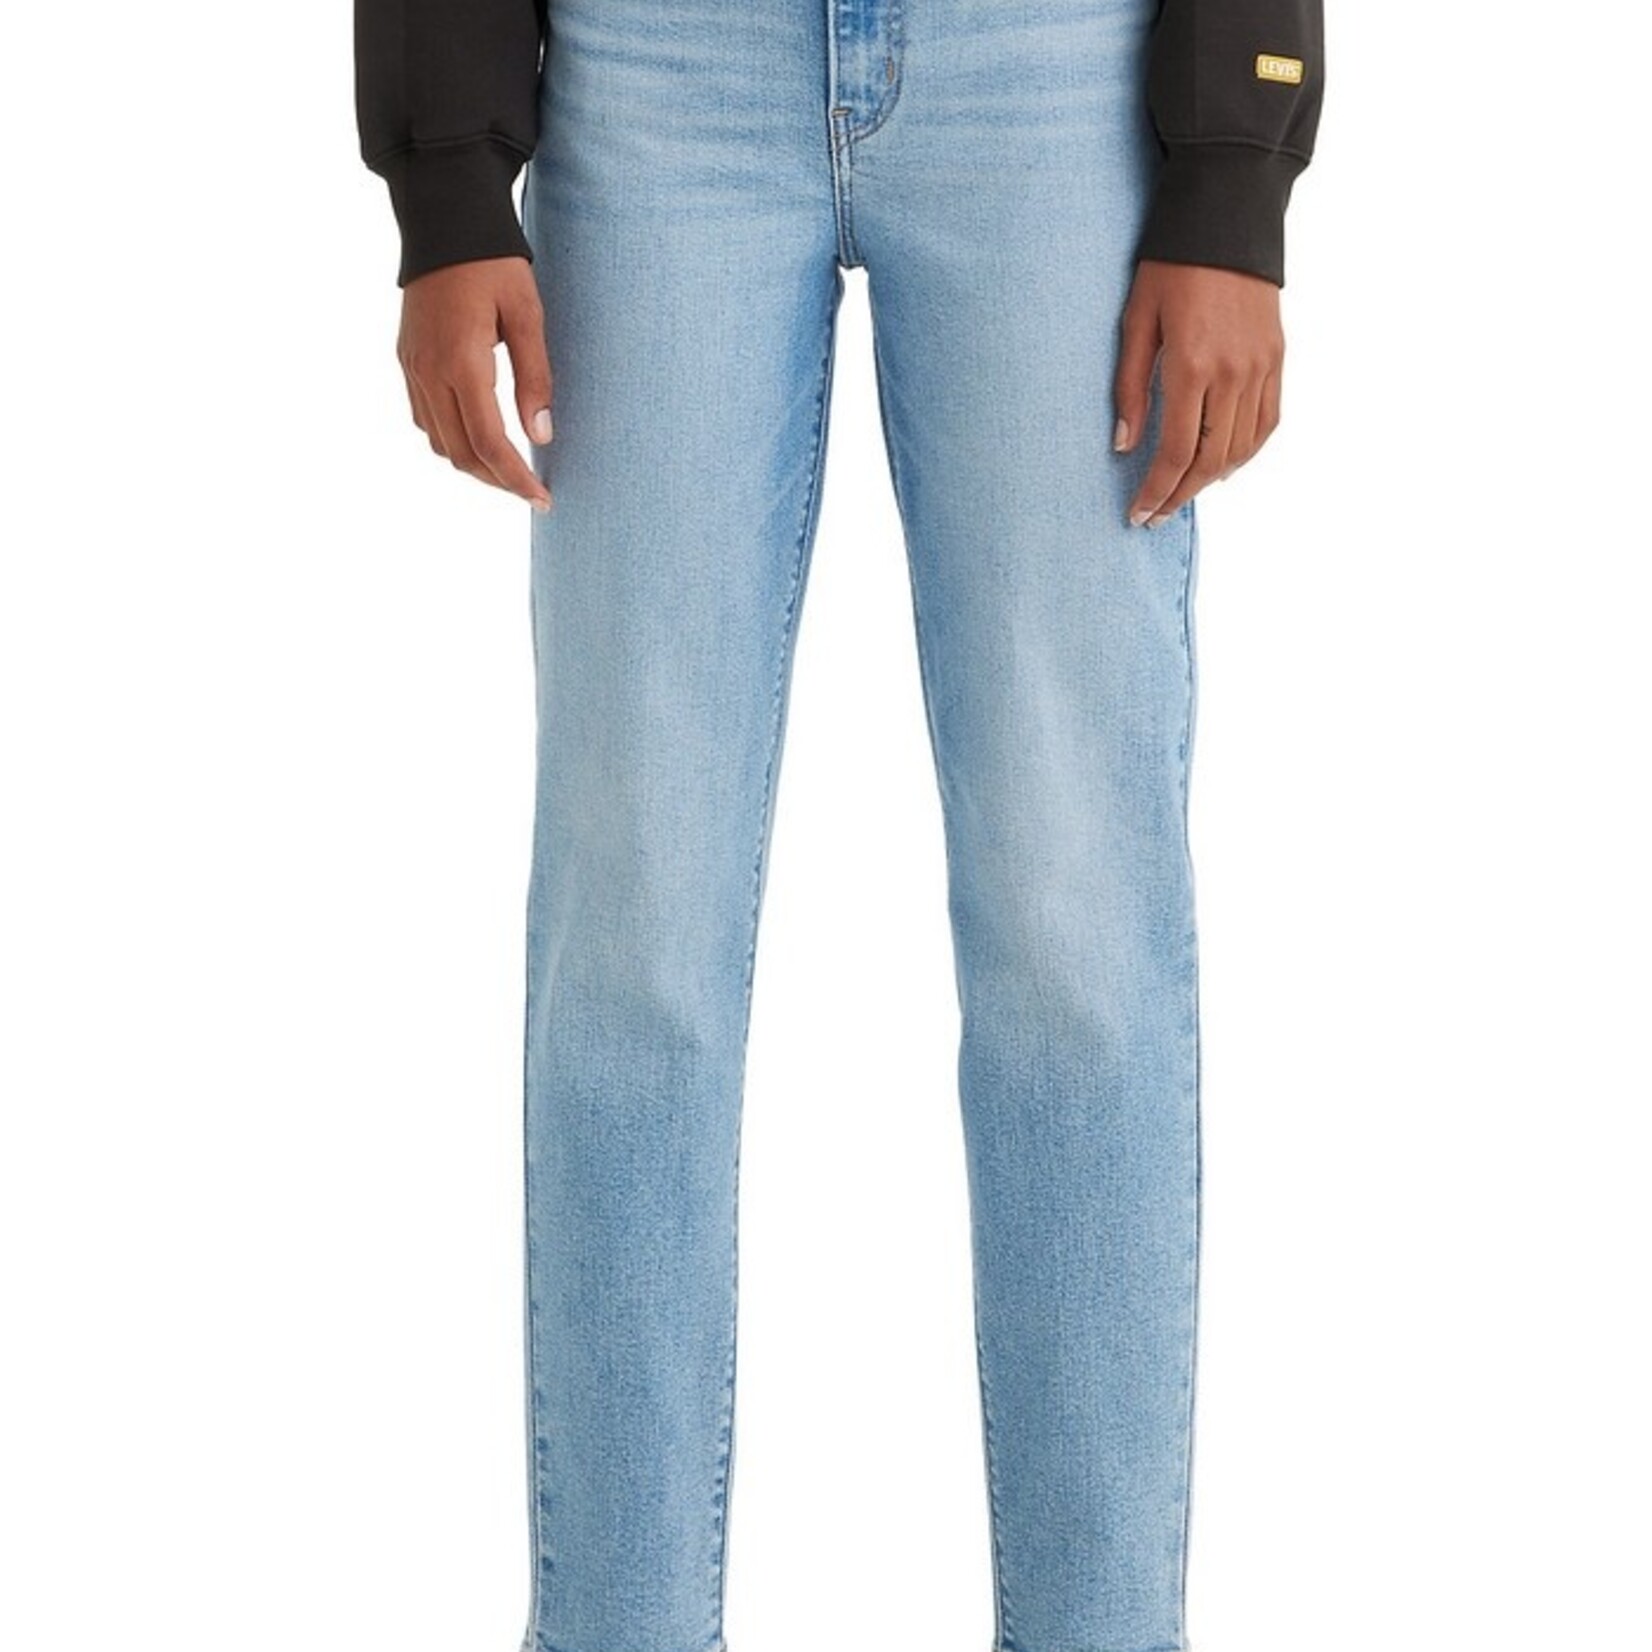 Levi's Jean MOM taille haute/High-Waisted MOM jean-Now You Know